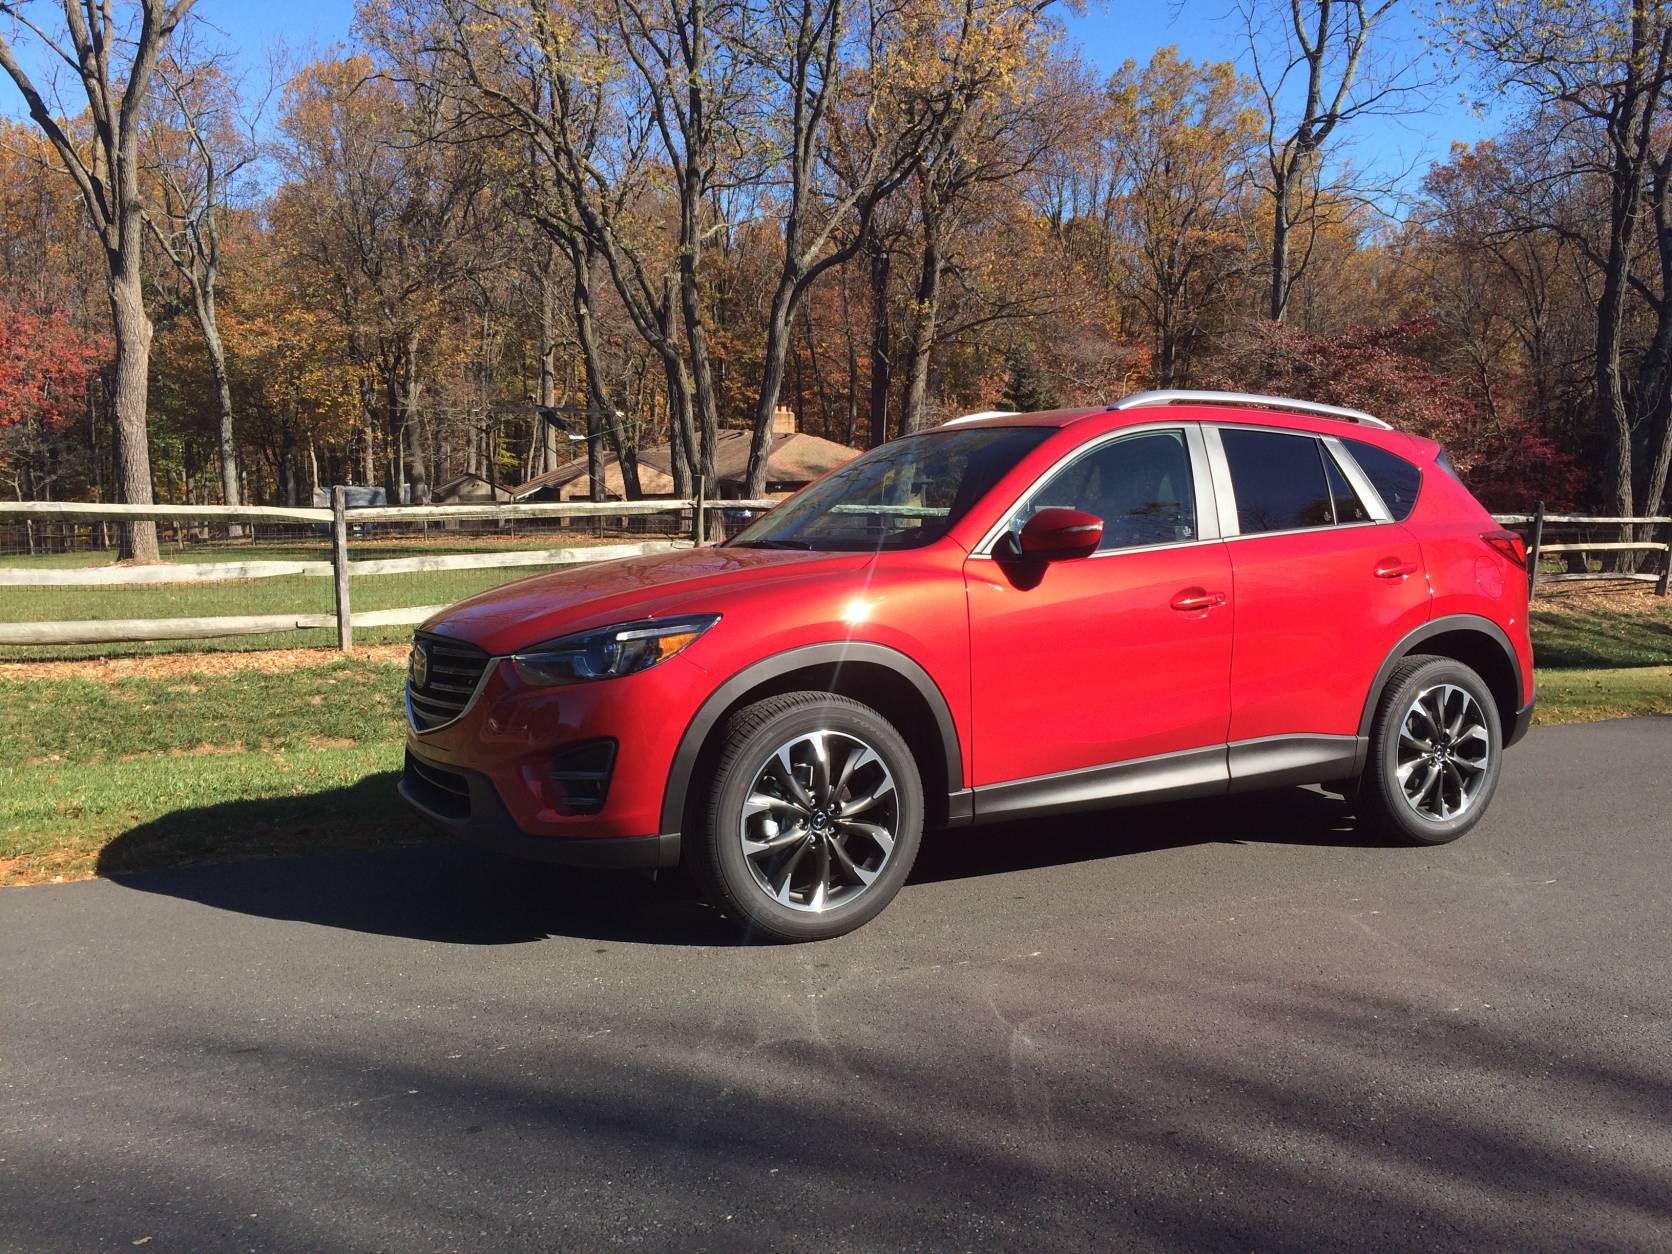 The 2016.5 Mazda CX-5 seems to offer a ride with less noise than in previous versions. (WTOP/Mike Parris)